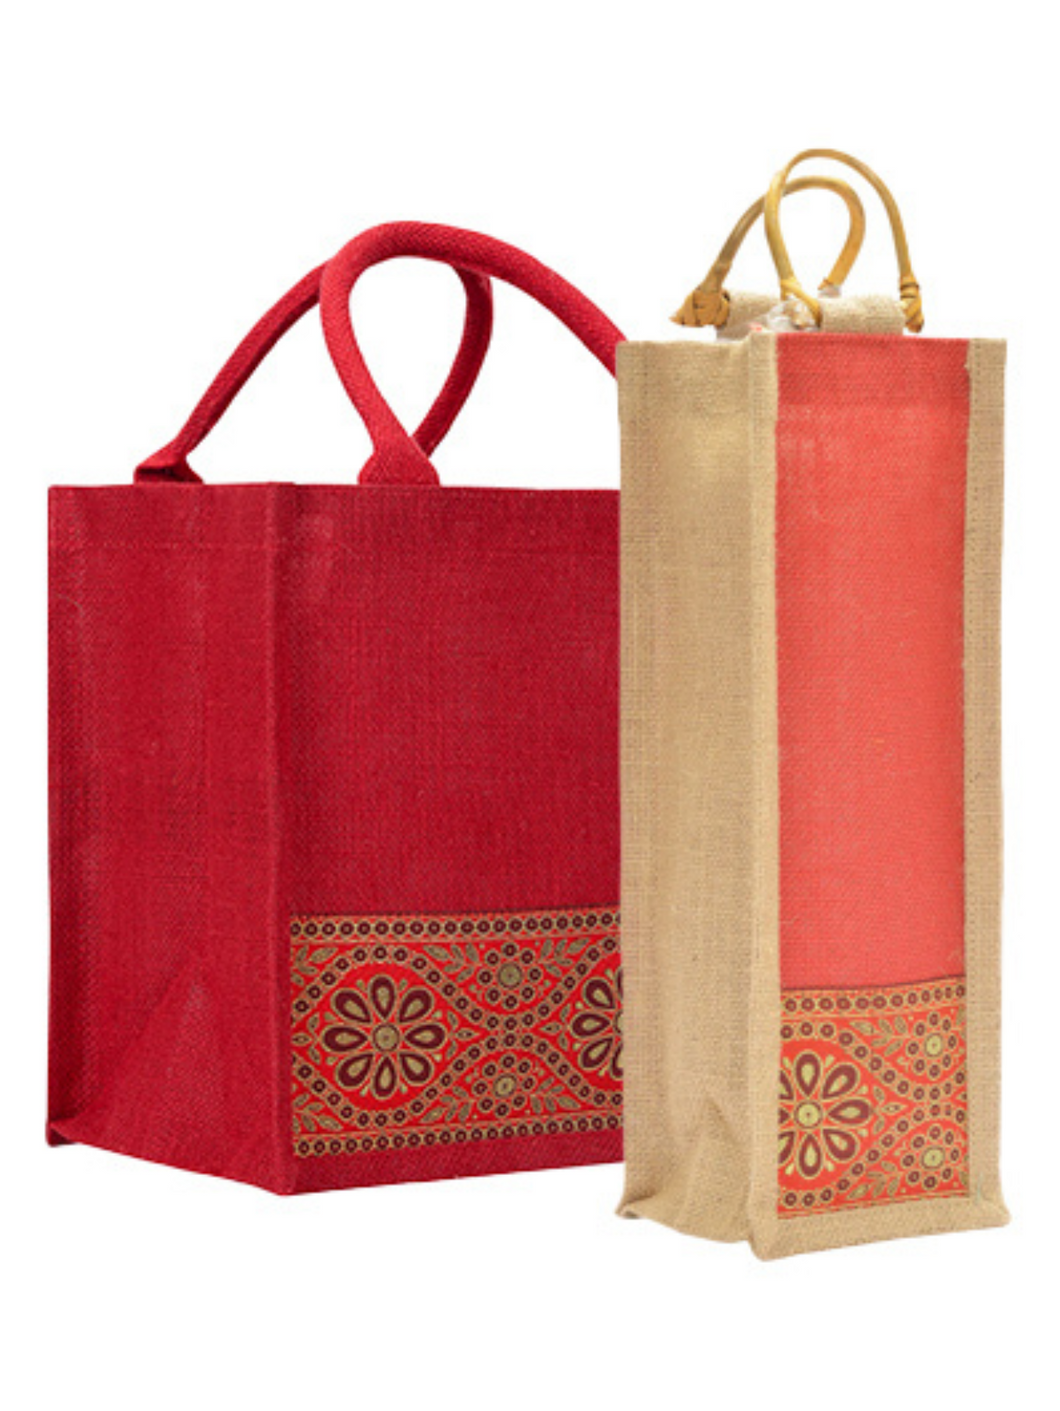 Combo of 11X10 LACE ZIPPER LUNCH (B-254-RED) and BOTTLE BAG WITH LACE / PRINT (B-010-RED)